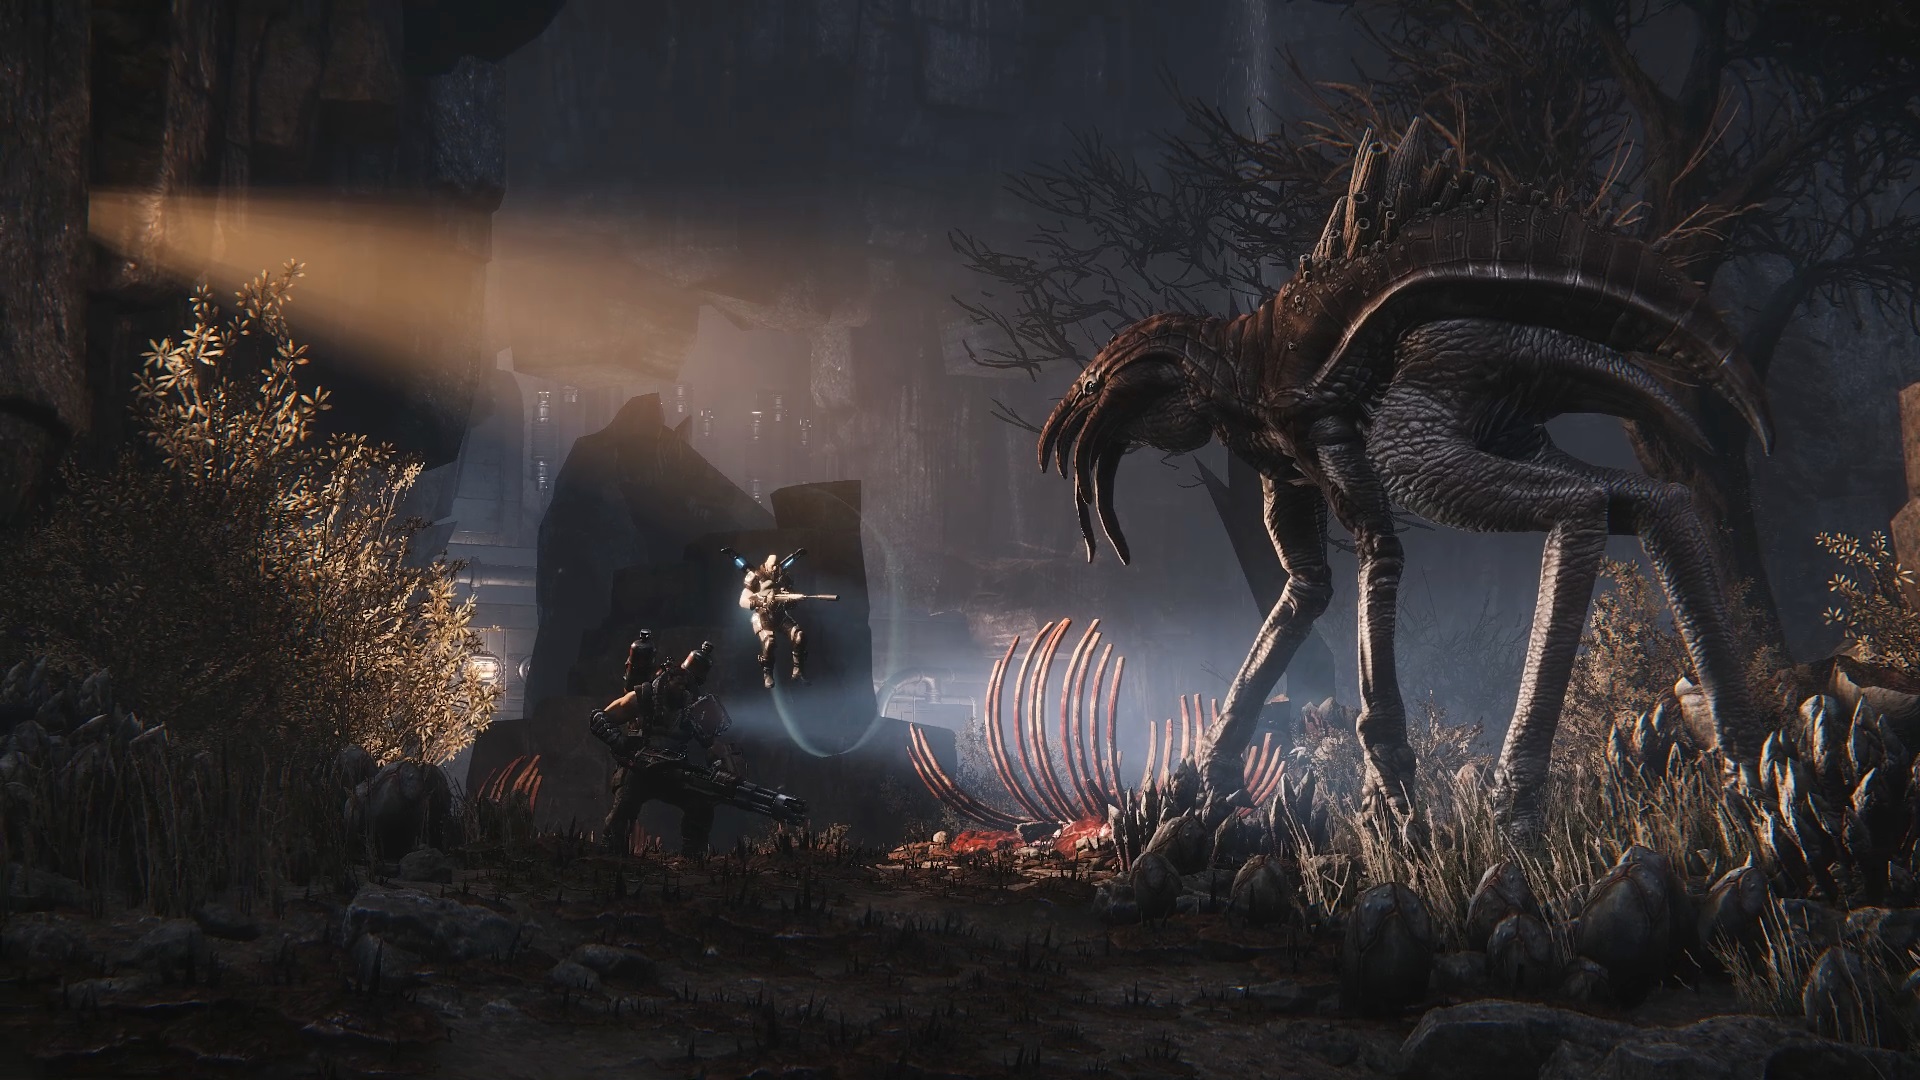 Take-Two CEO Thinks Evolve DLC Controversy is a "Good Thing"